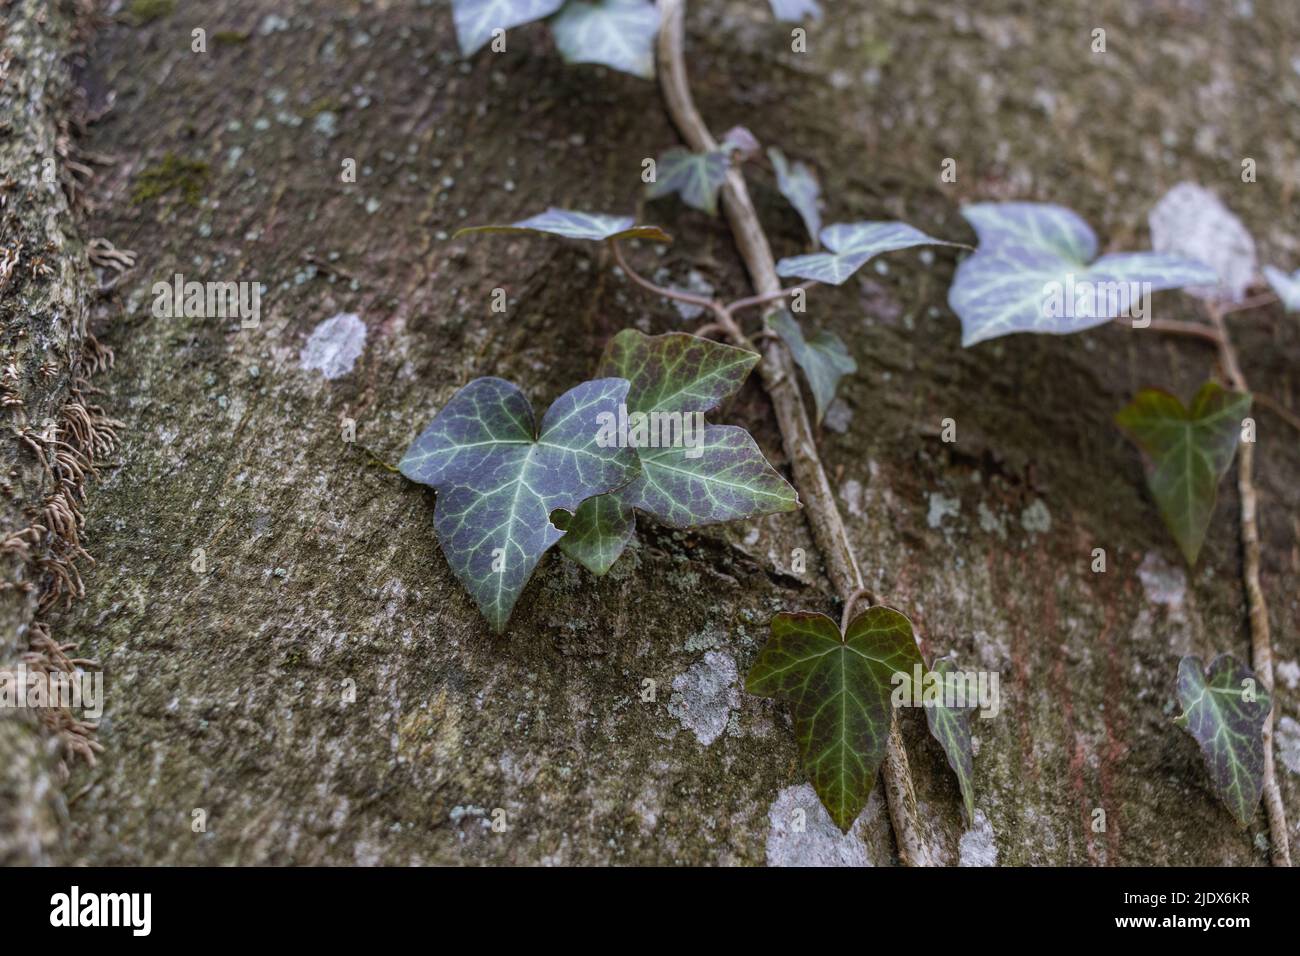 Ivy roots on tree trunk. Hedera helix or European ivy climbing on bark of a tree. Close up Stock Photo